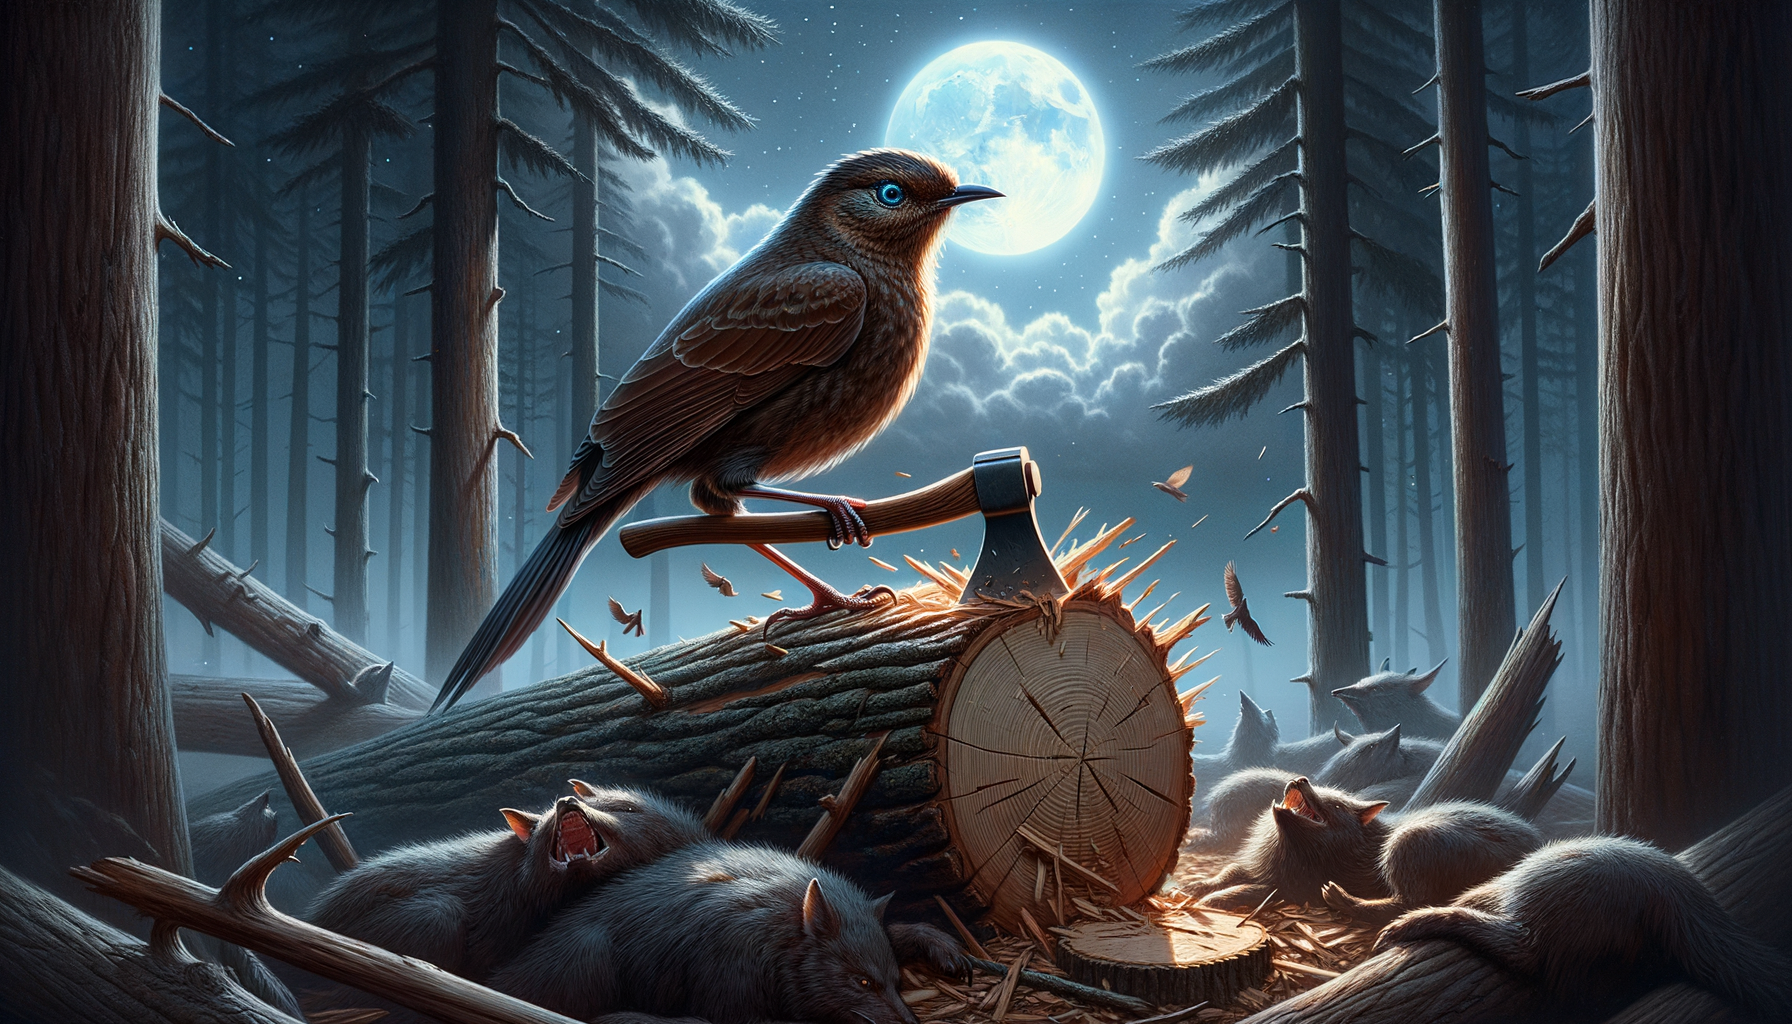 discover if your nightingale companion is the best tree chopper and beast slayer in this exciting adventure game.